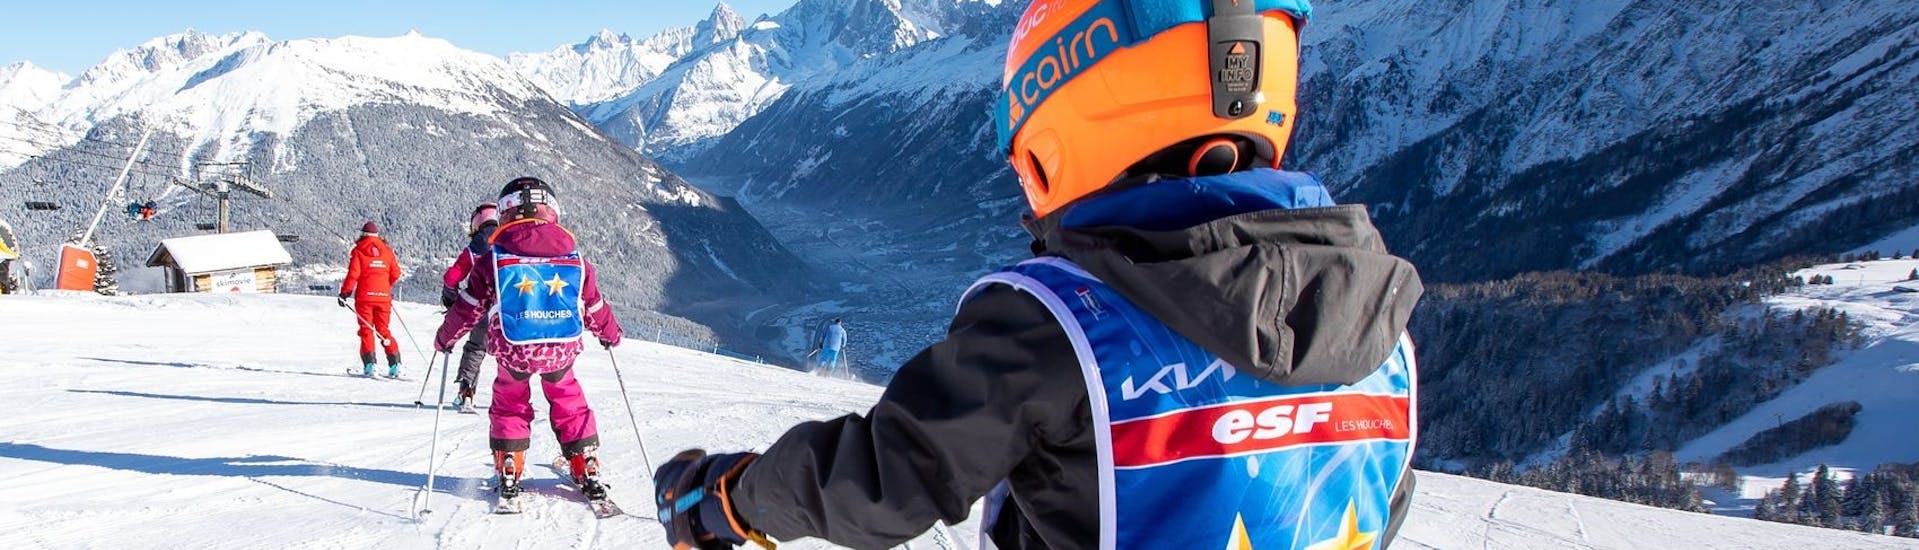 Kids enjoy their Kids Ski Lessons (6-12 y.) of All Levels with ESF les Houches.